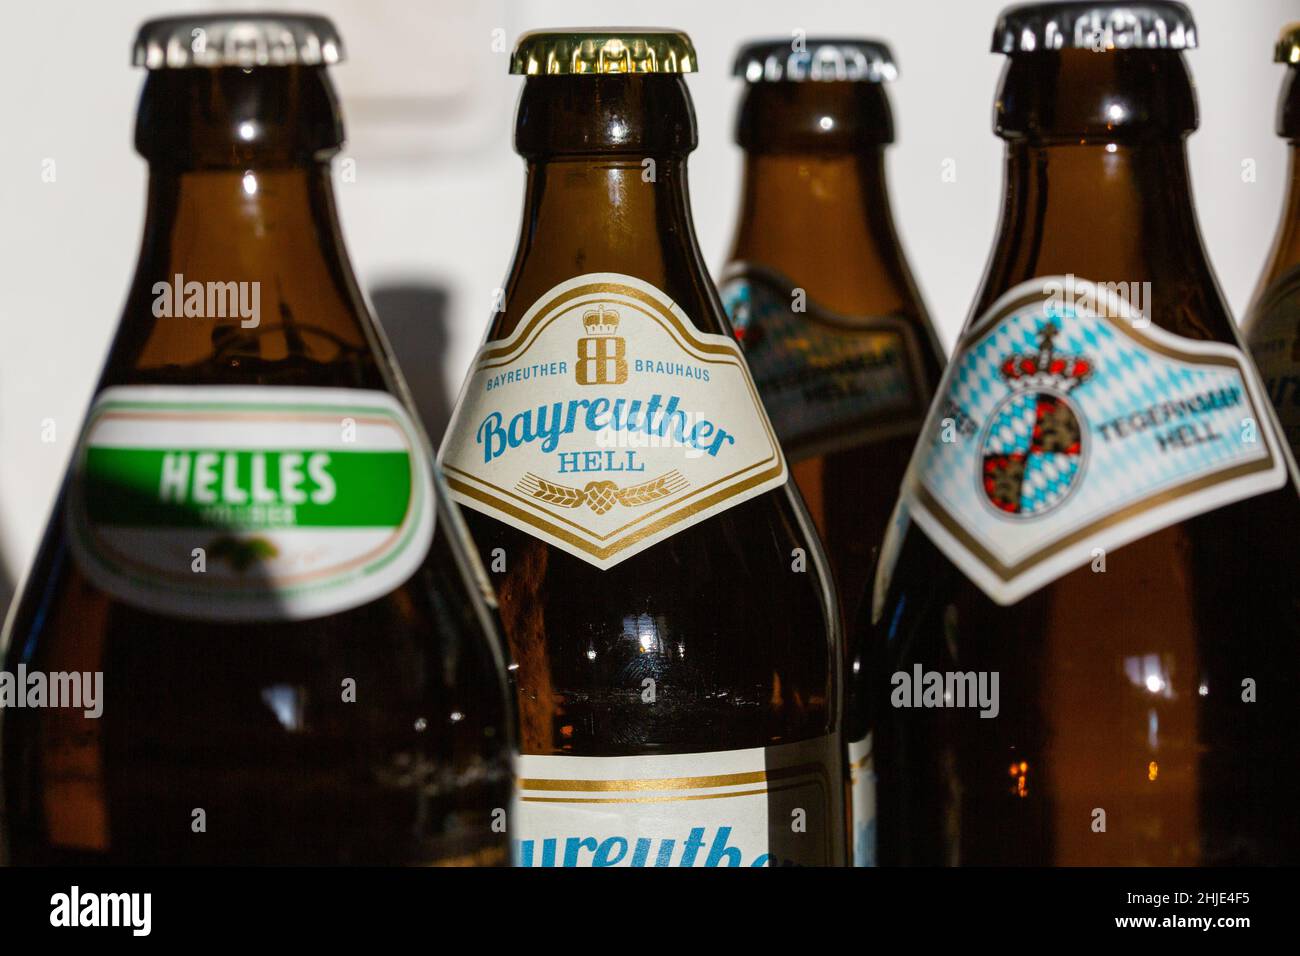 Alamy hi-res - stock Lagerbier photography images and hell